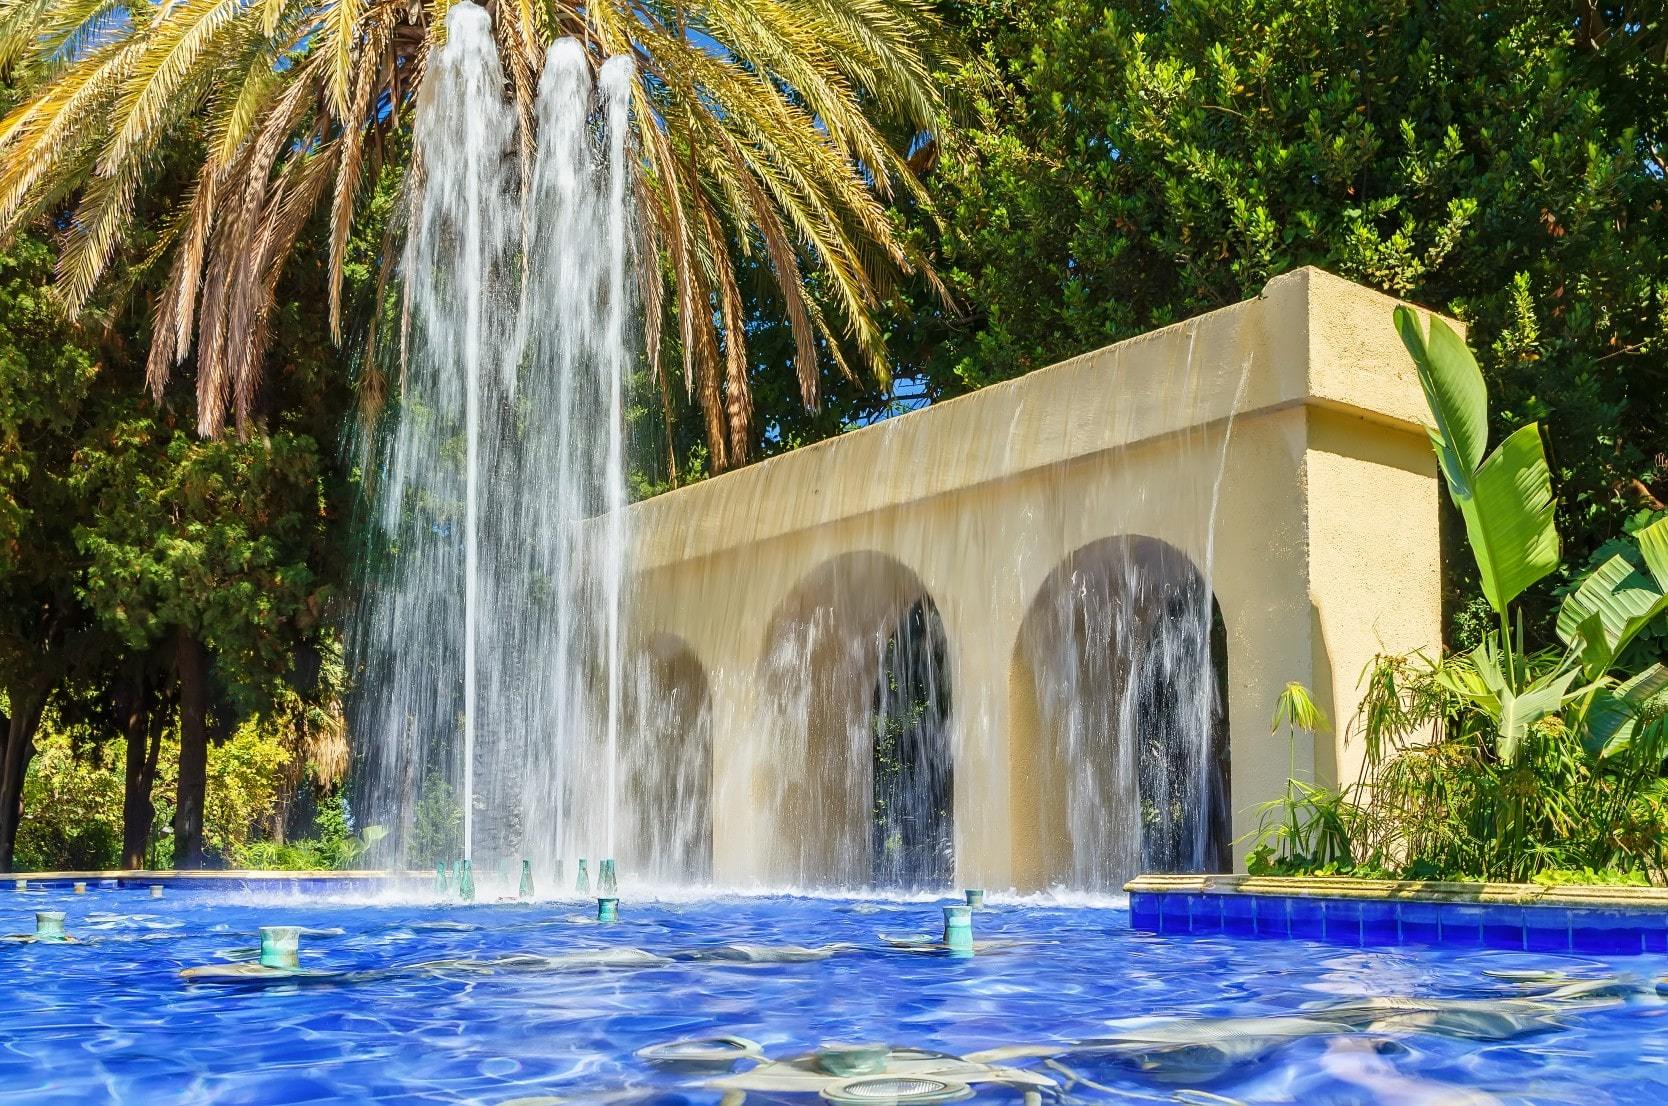 Fountain at the circle in the city of Orange, California